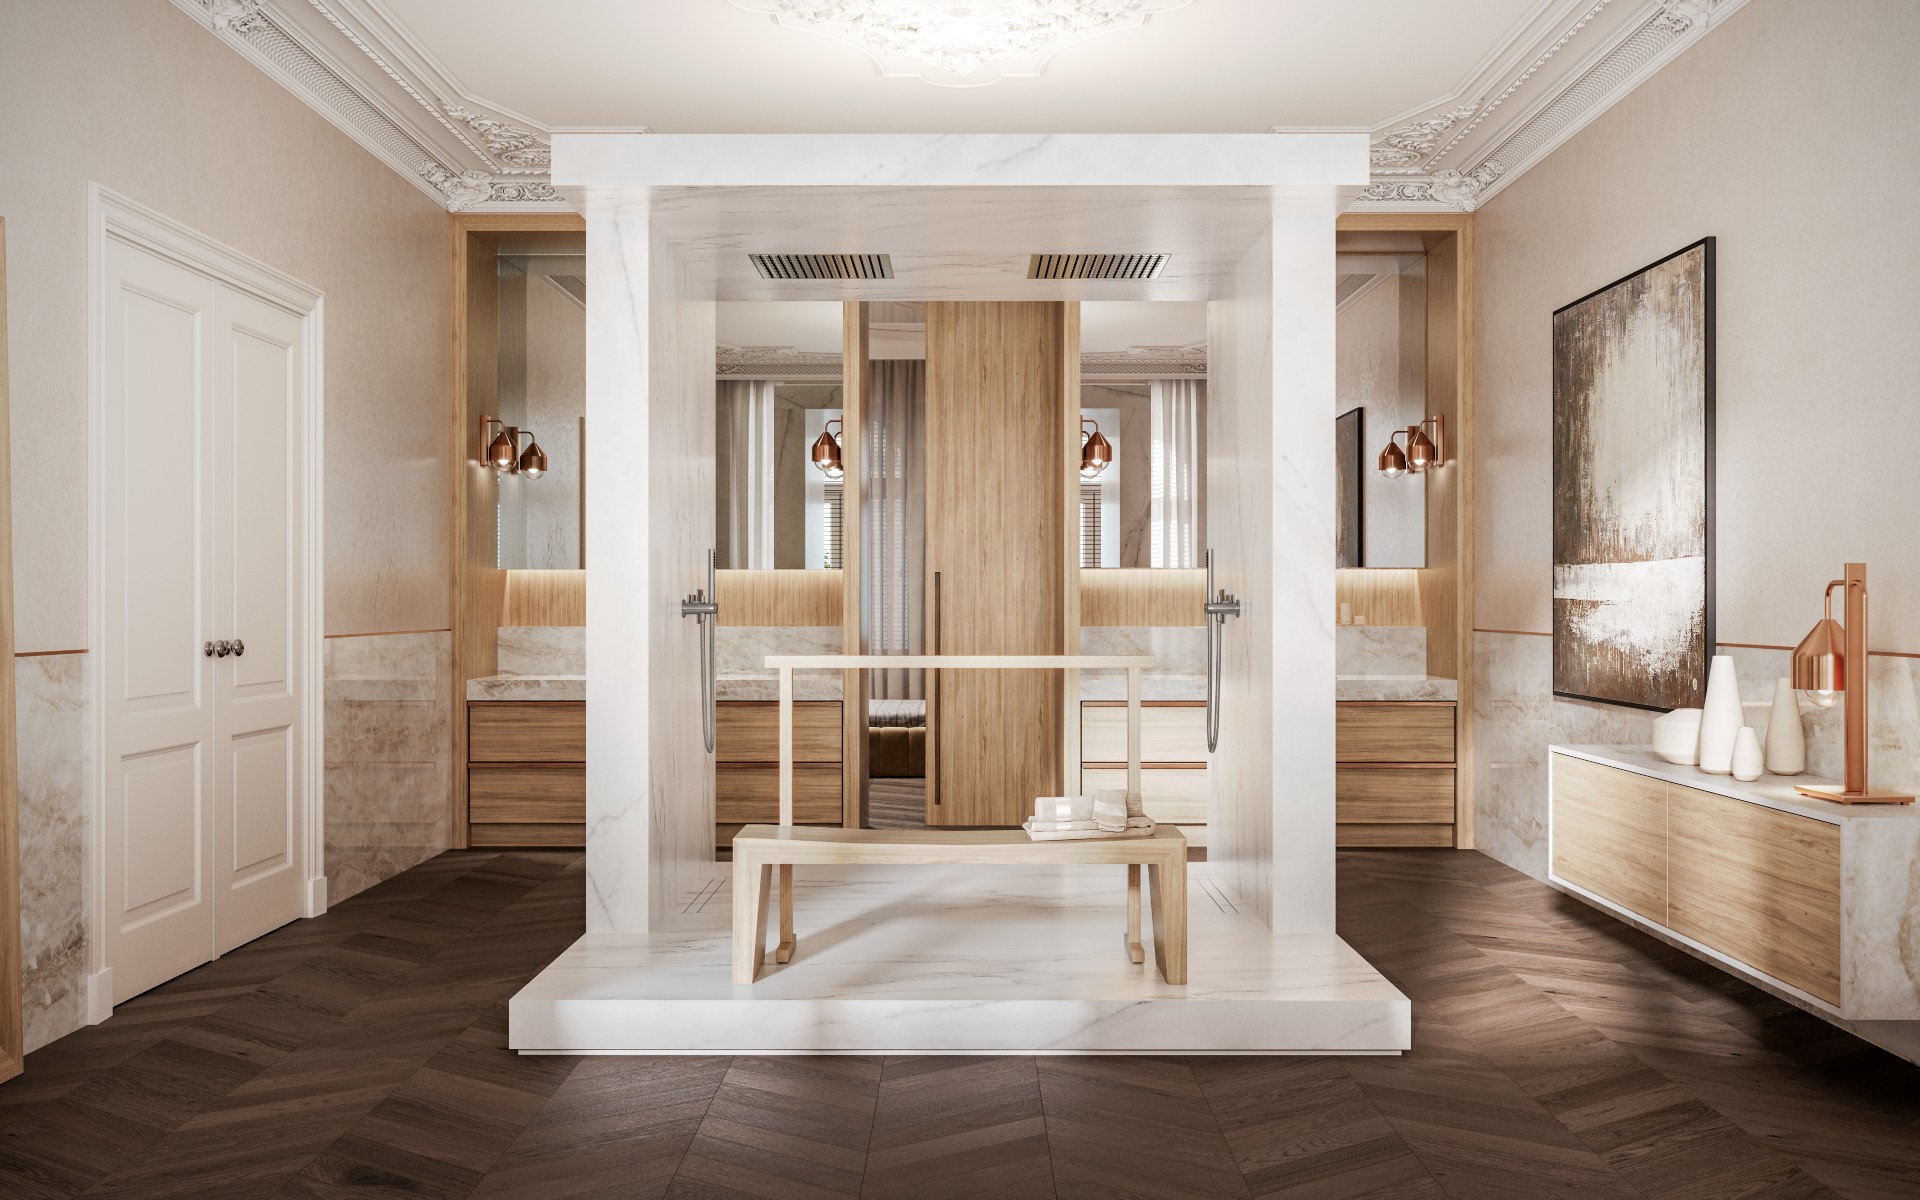 Image of THE PALAZZO IMÁGEN GENERAL in 'Space for two', a bathroom meticulously designed by Marisa Gallo - Cosentino